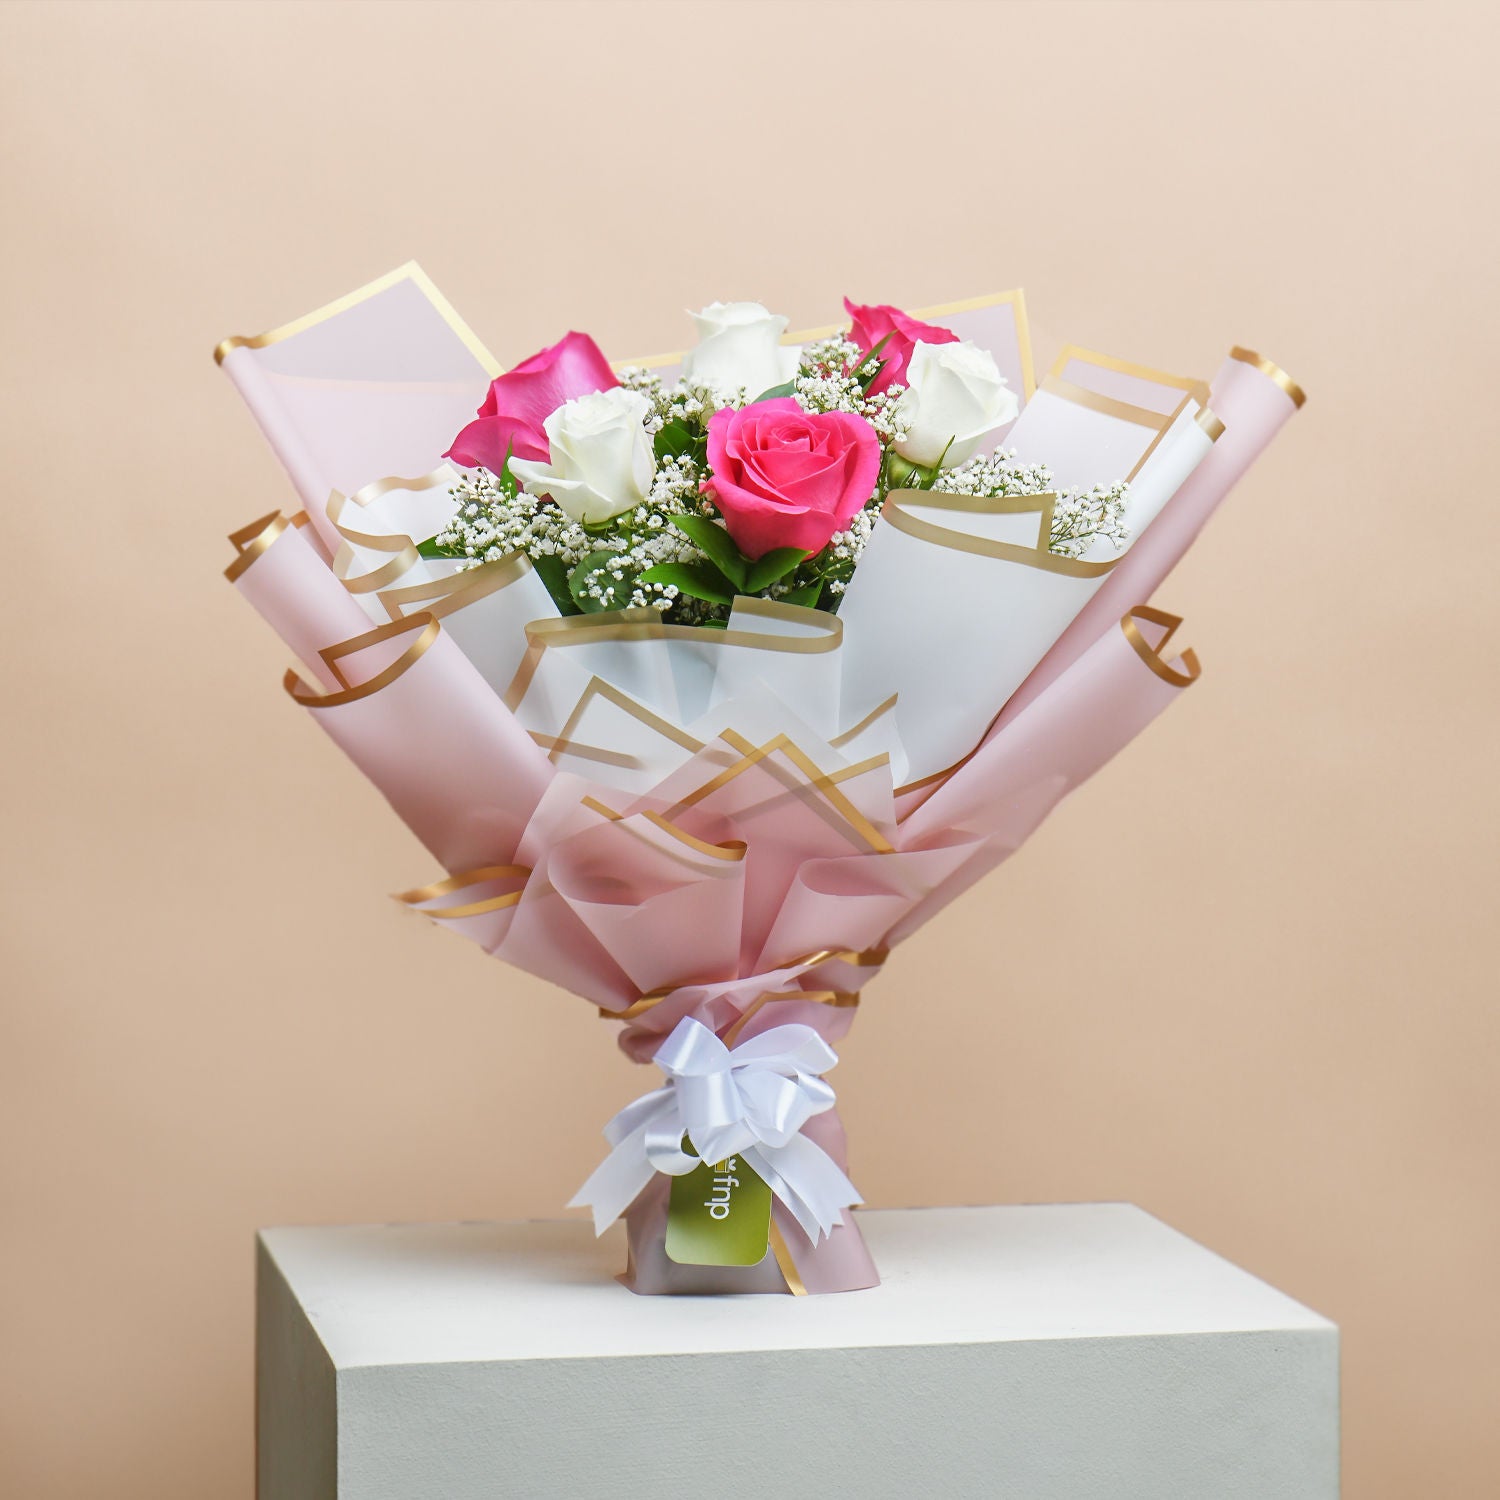 Pink and White Roses Bouquet